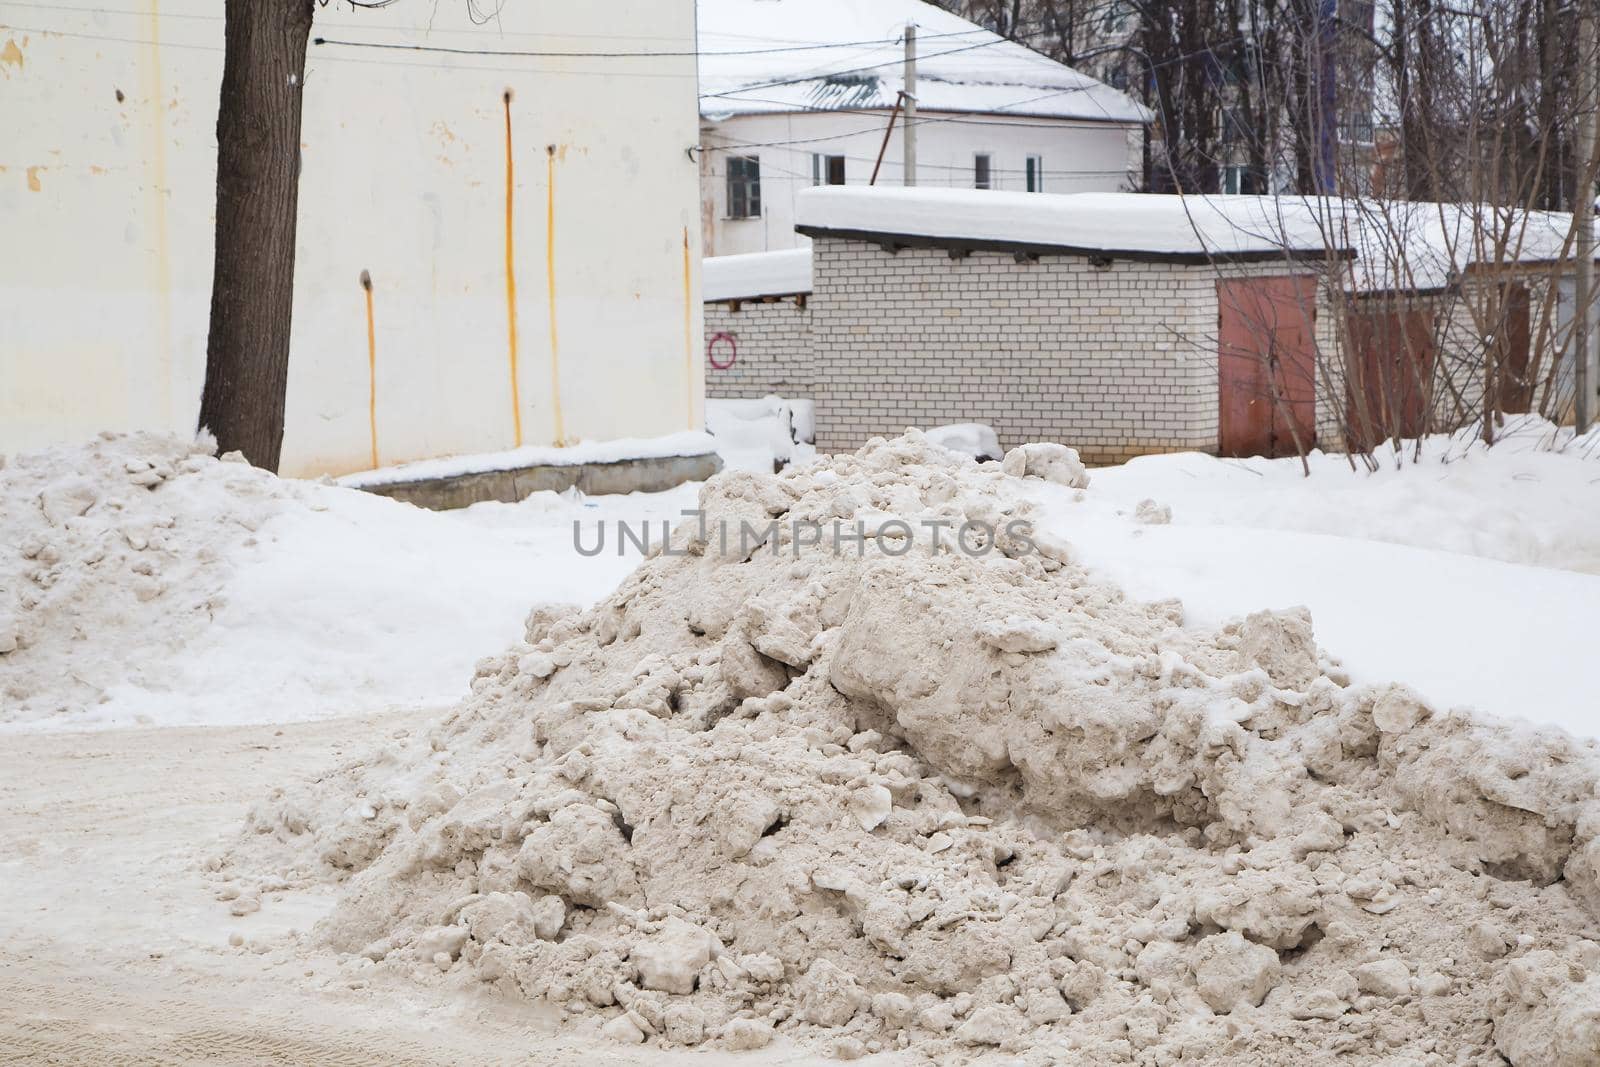 A large snowdrift by the road against the backdrop of a city street. On the road lies dirty snow in high heaps. Urban winter landscape. Cloudy winter day, soft light.